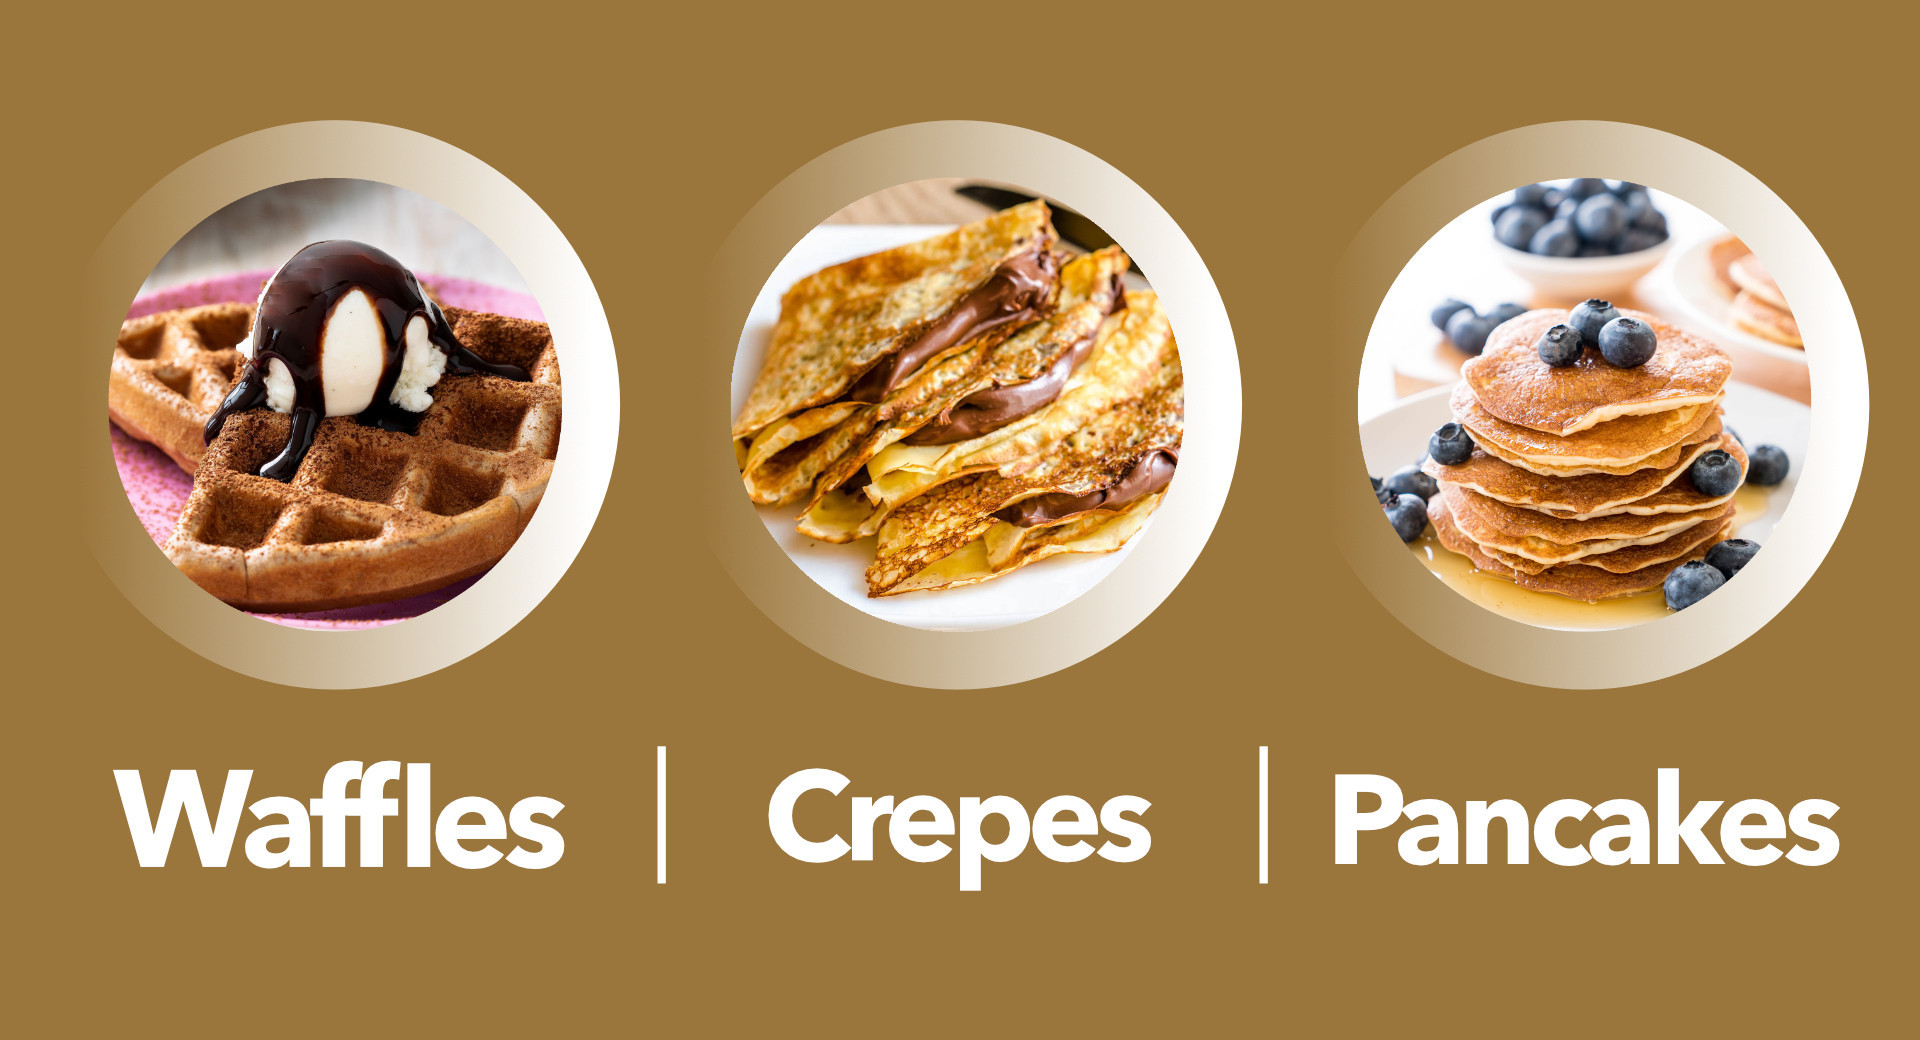 Time for sweet temptations. Discover the mix for Pancakes, Waffles and Crepes.